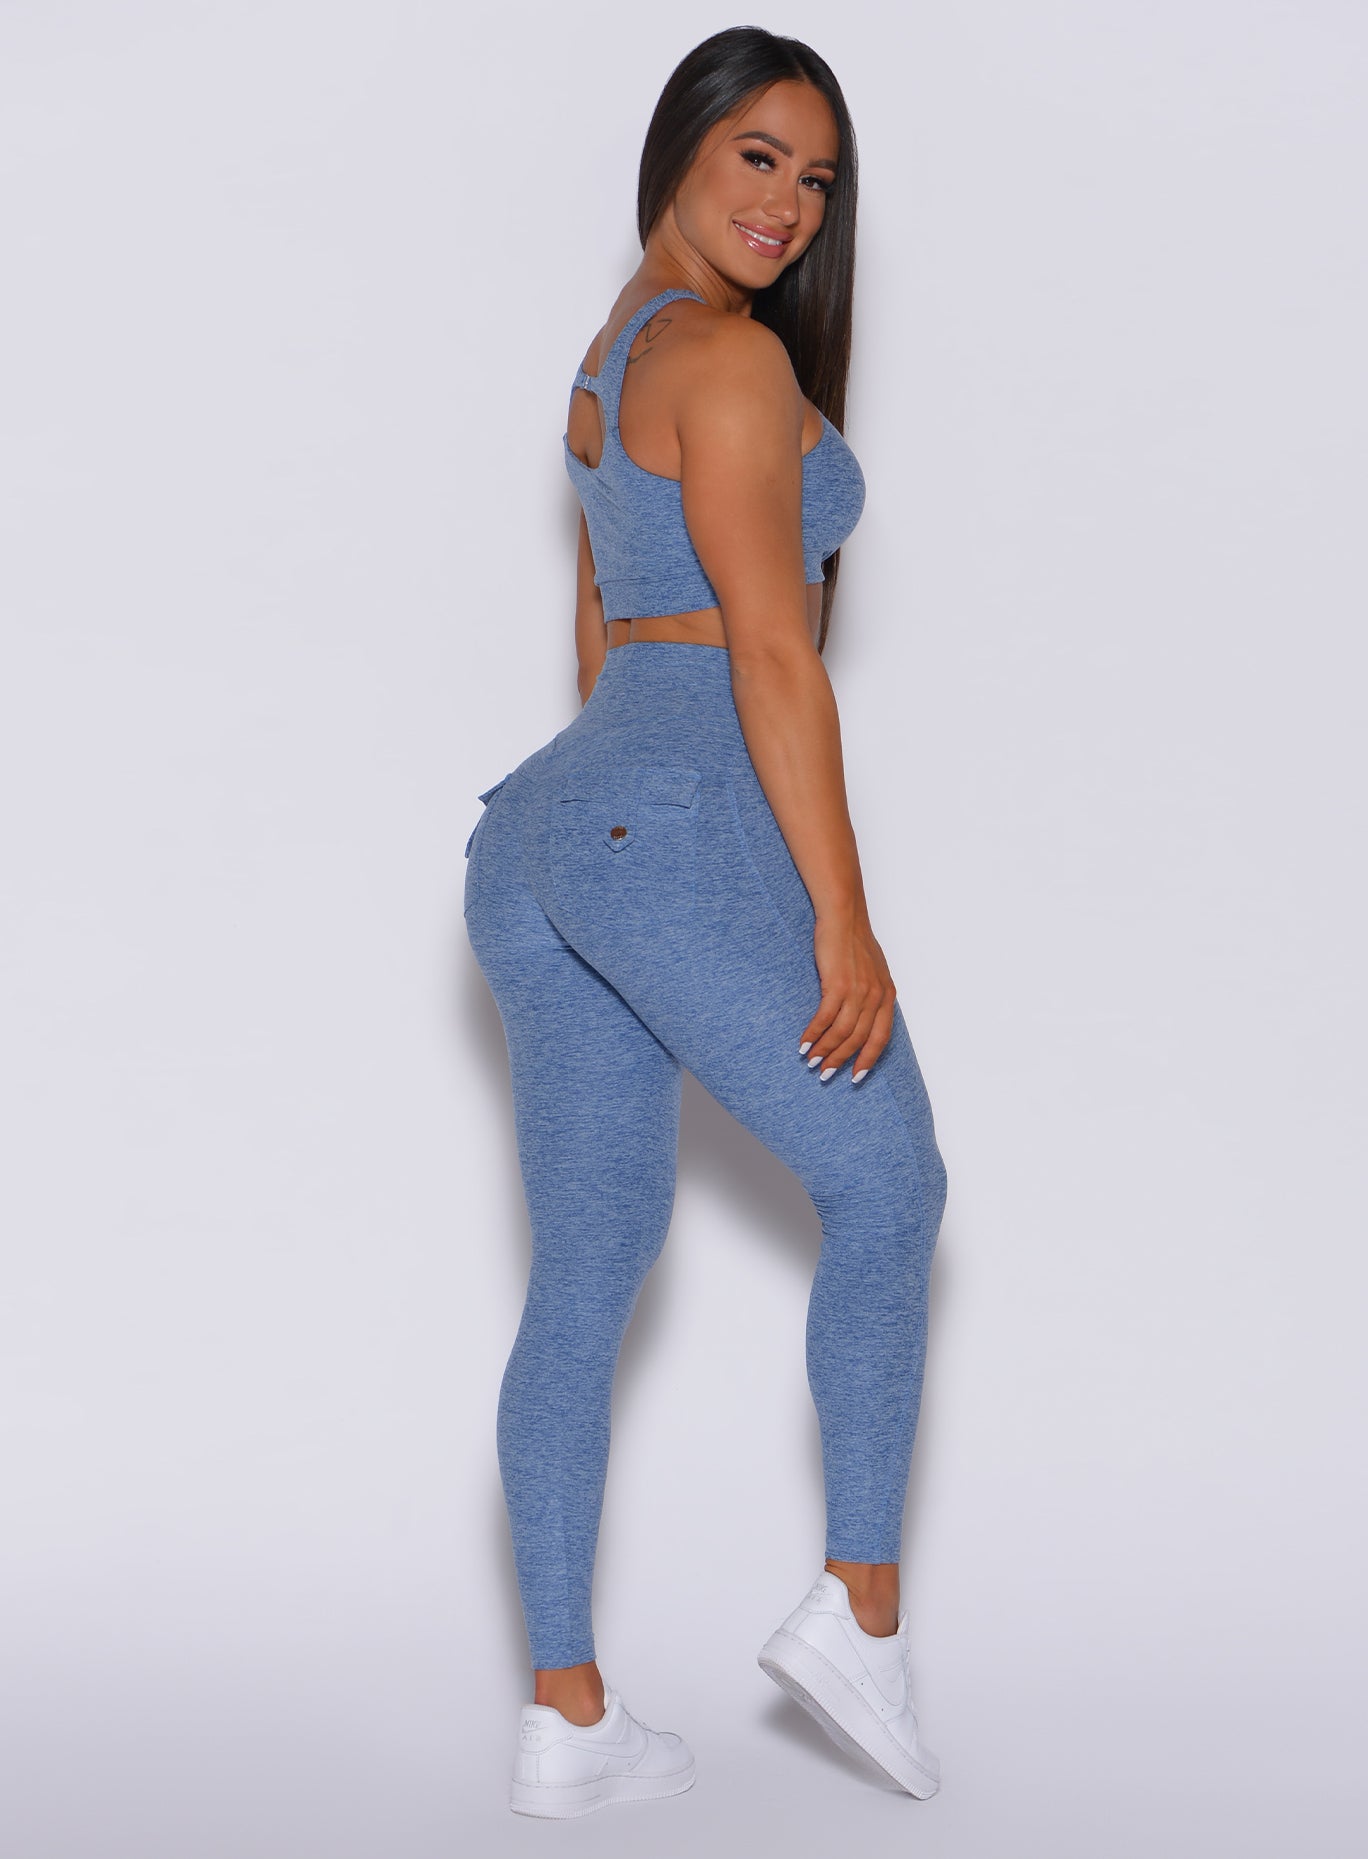 Right profile view of a model in our Pocket Pop Leggings in sky blue color and a matching sports bra